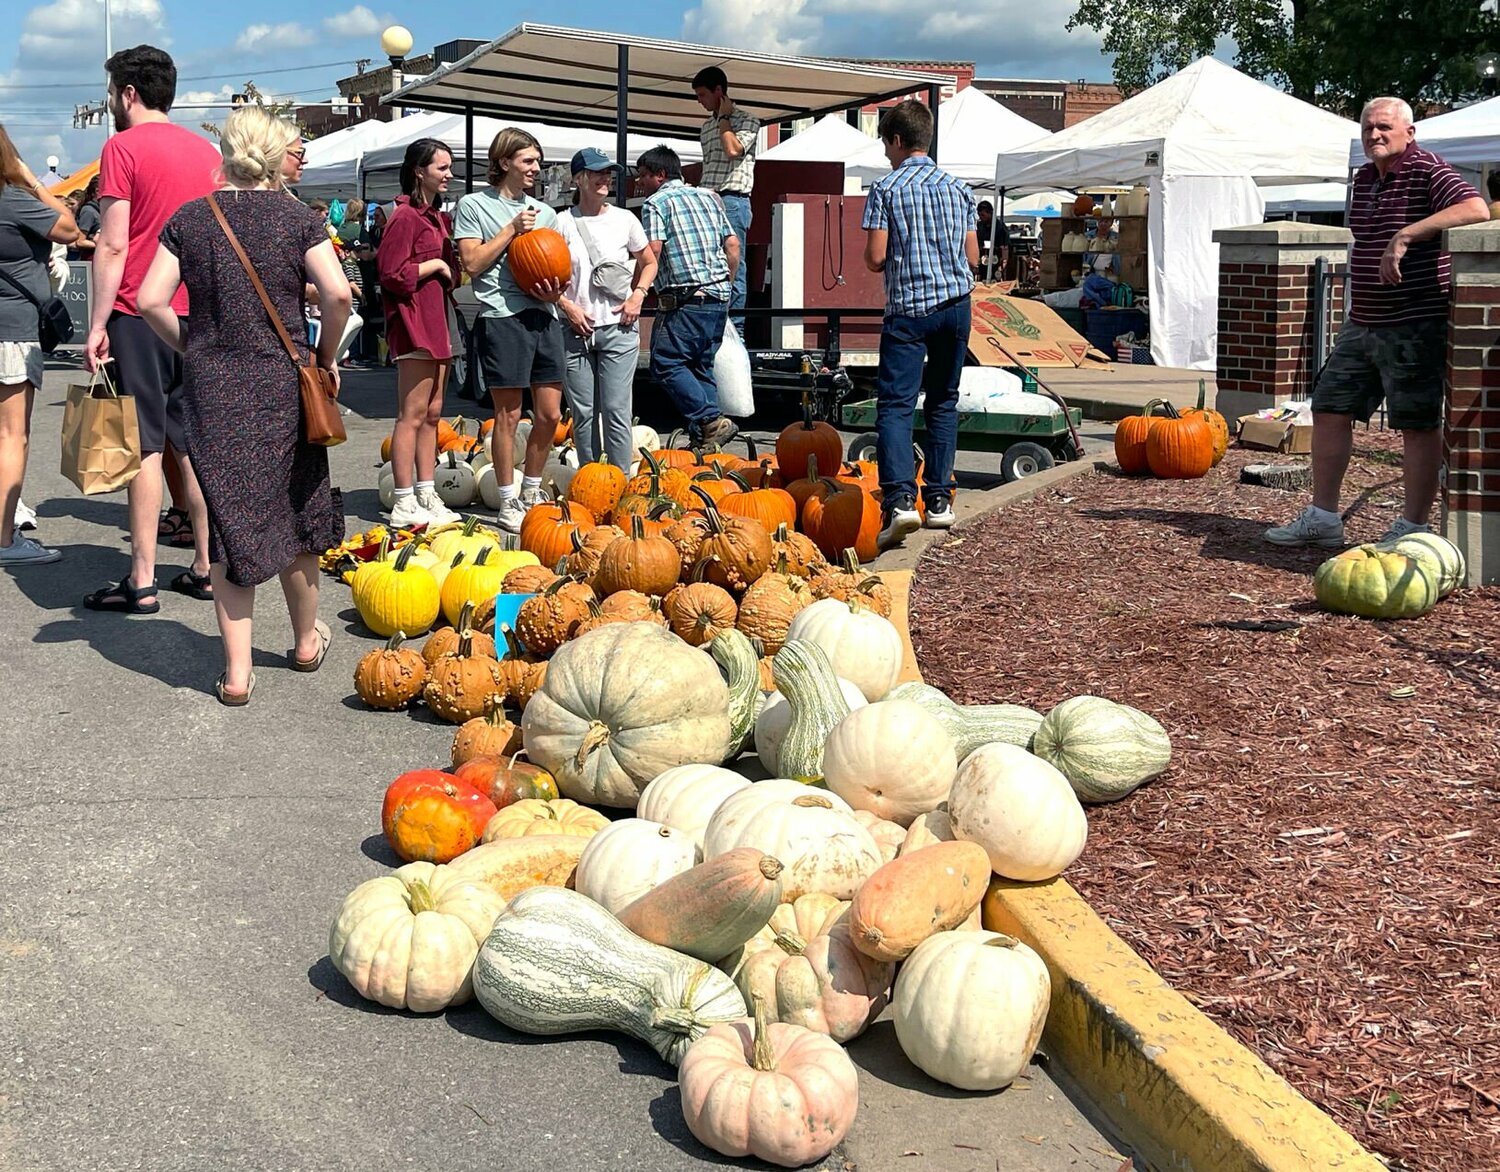 Gourds and pumpkins were available at the Red Barn Arts and Crafts Festival.